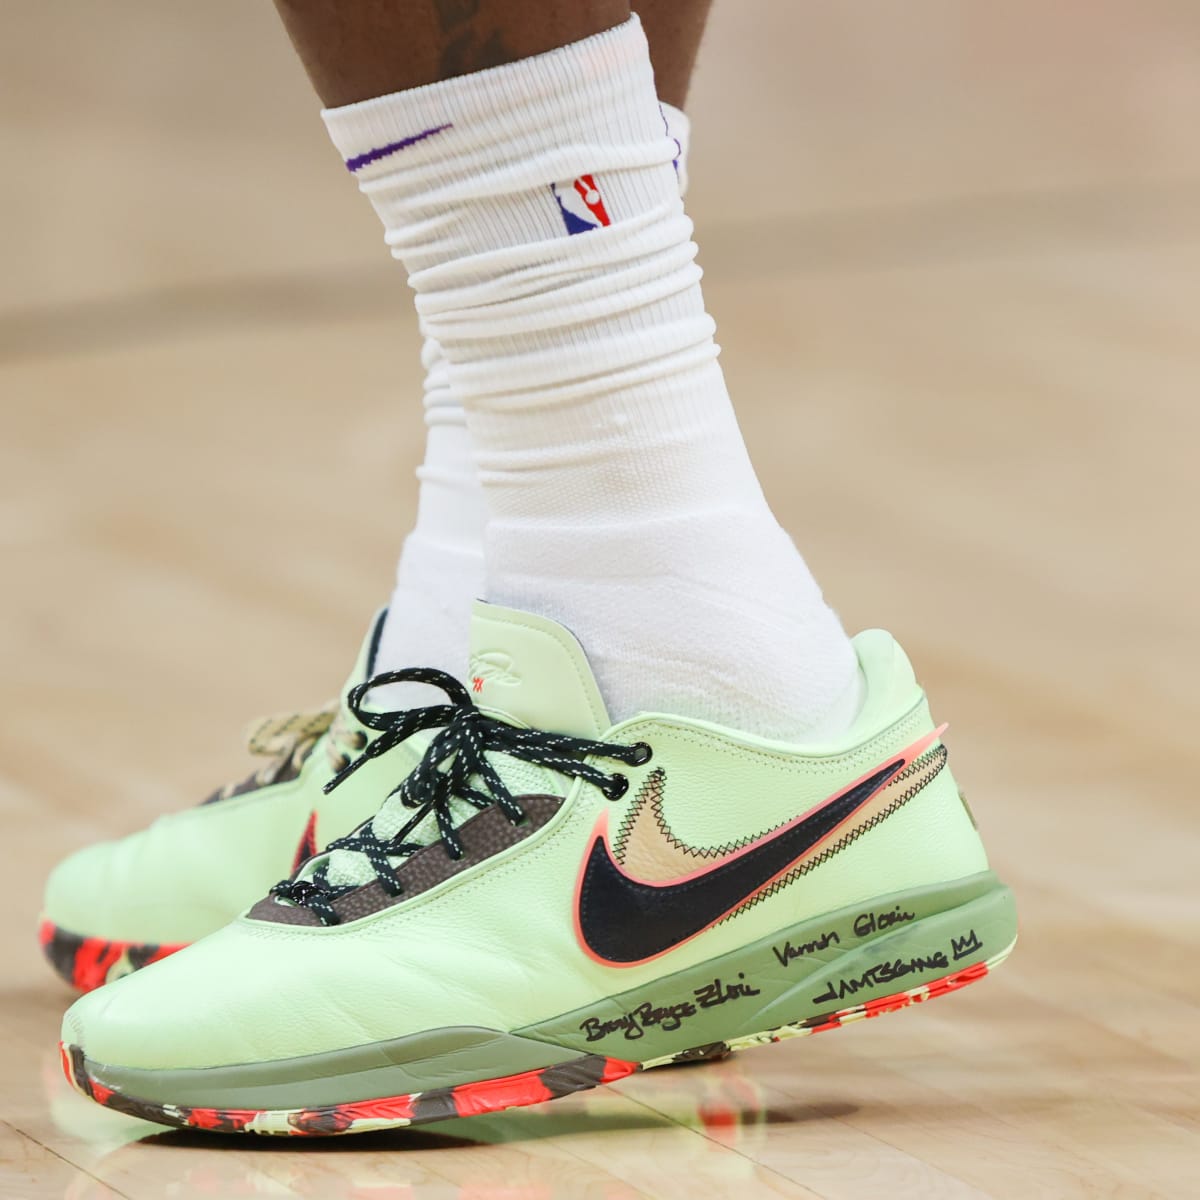 LeBron James Wears Unreleased Shoes in Epic Birthday Game - Sports